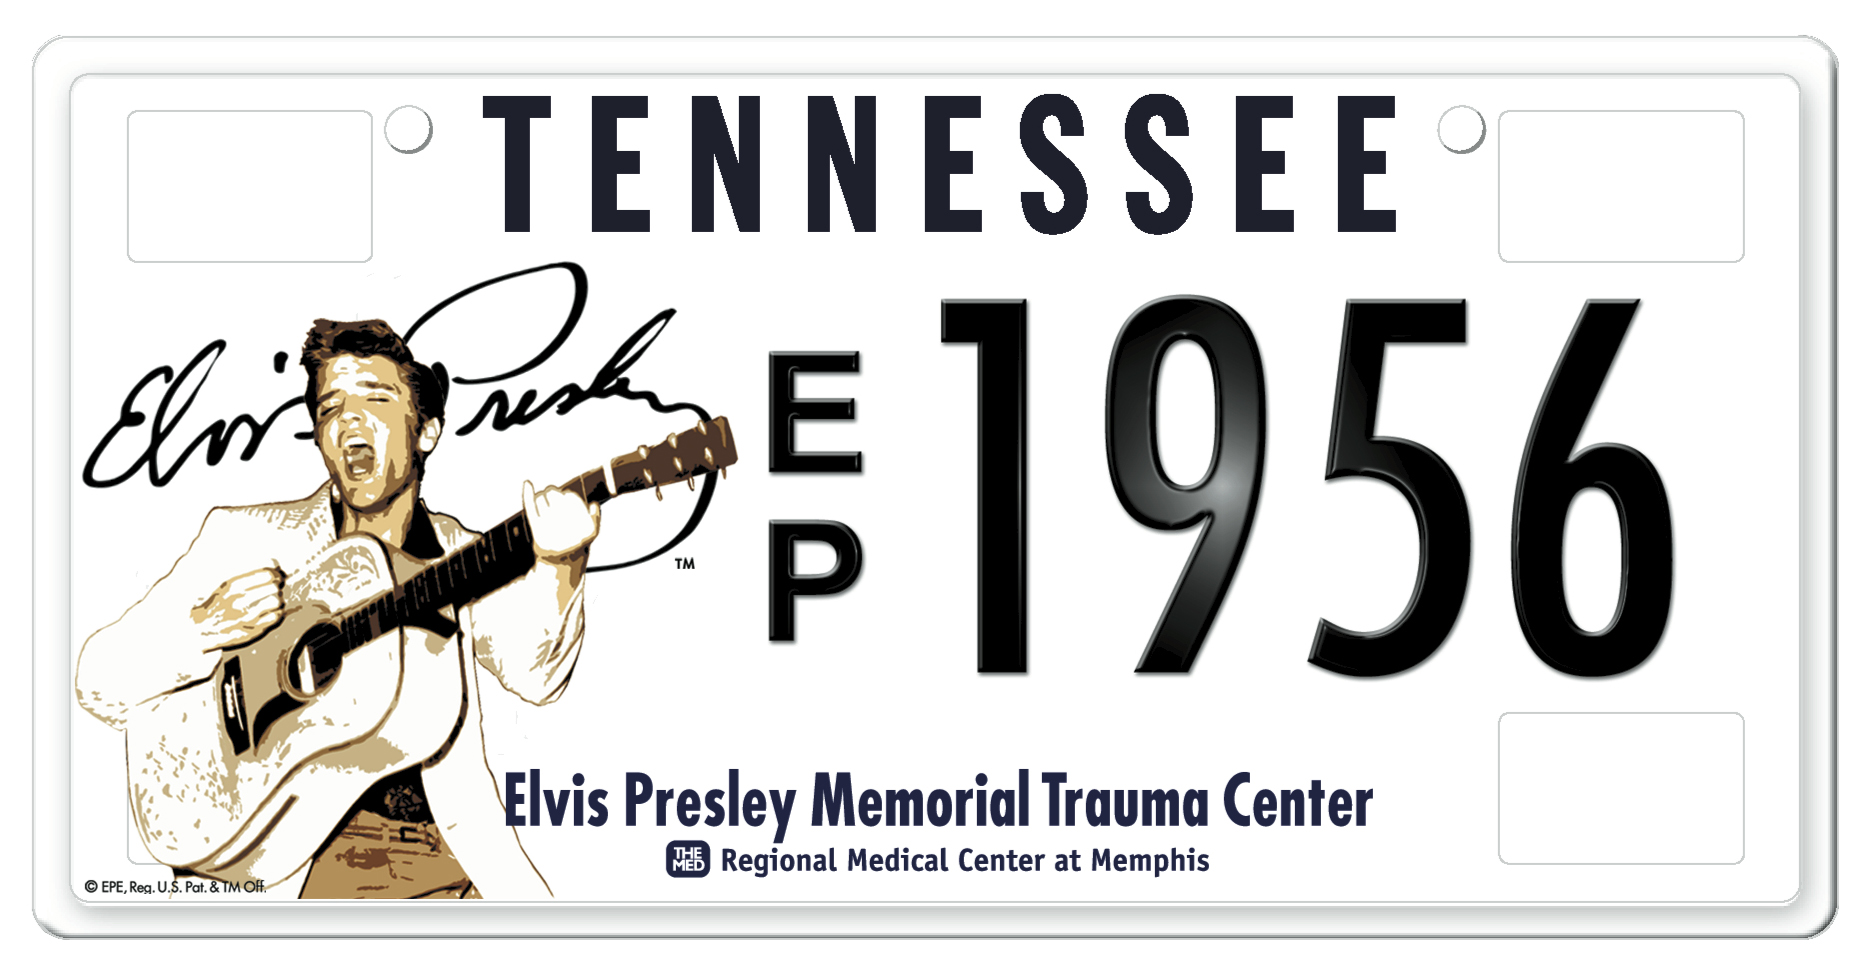  Official State of Tennessee License Plate benefitting The Elvis Presley Trauma Center  Branding creative, design and copywriting by Chuck Mitchell  The MED logo by the late Bill Womack 